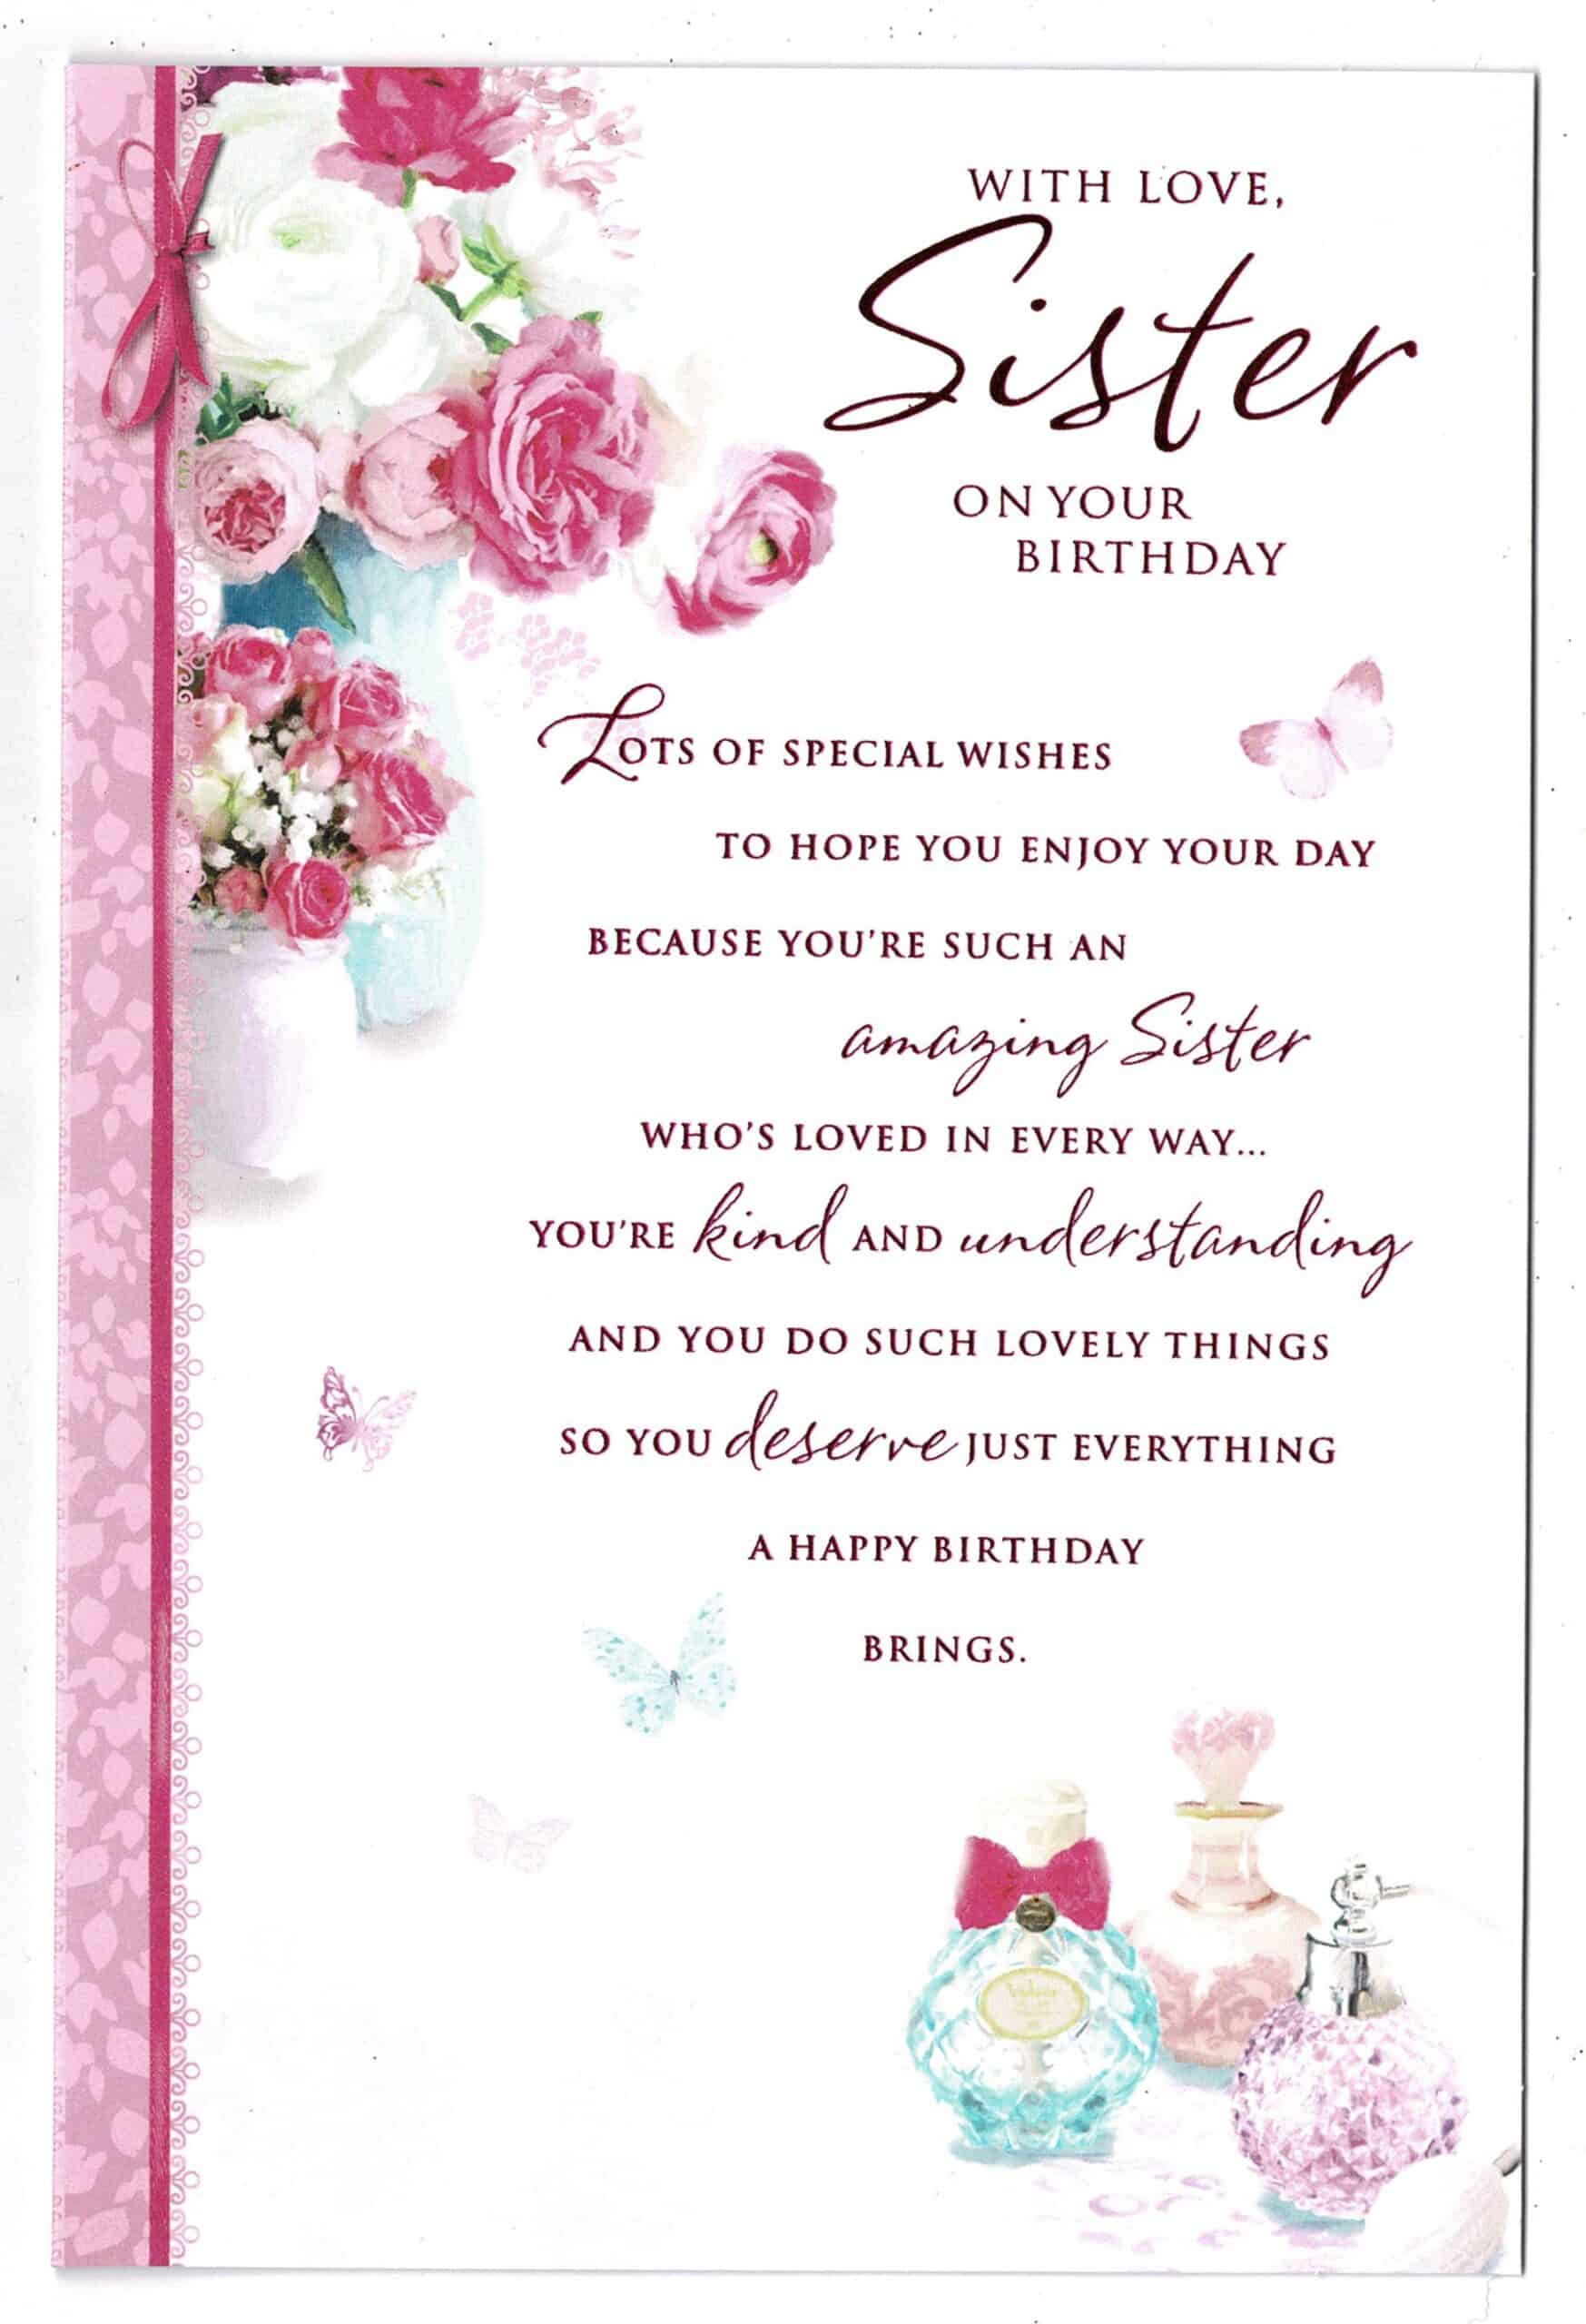 sister-birthday-card-with-love-sister-on-your-birthday-with-love